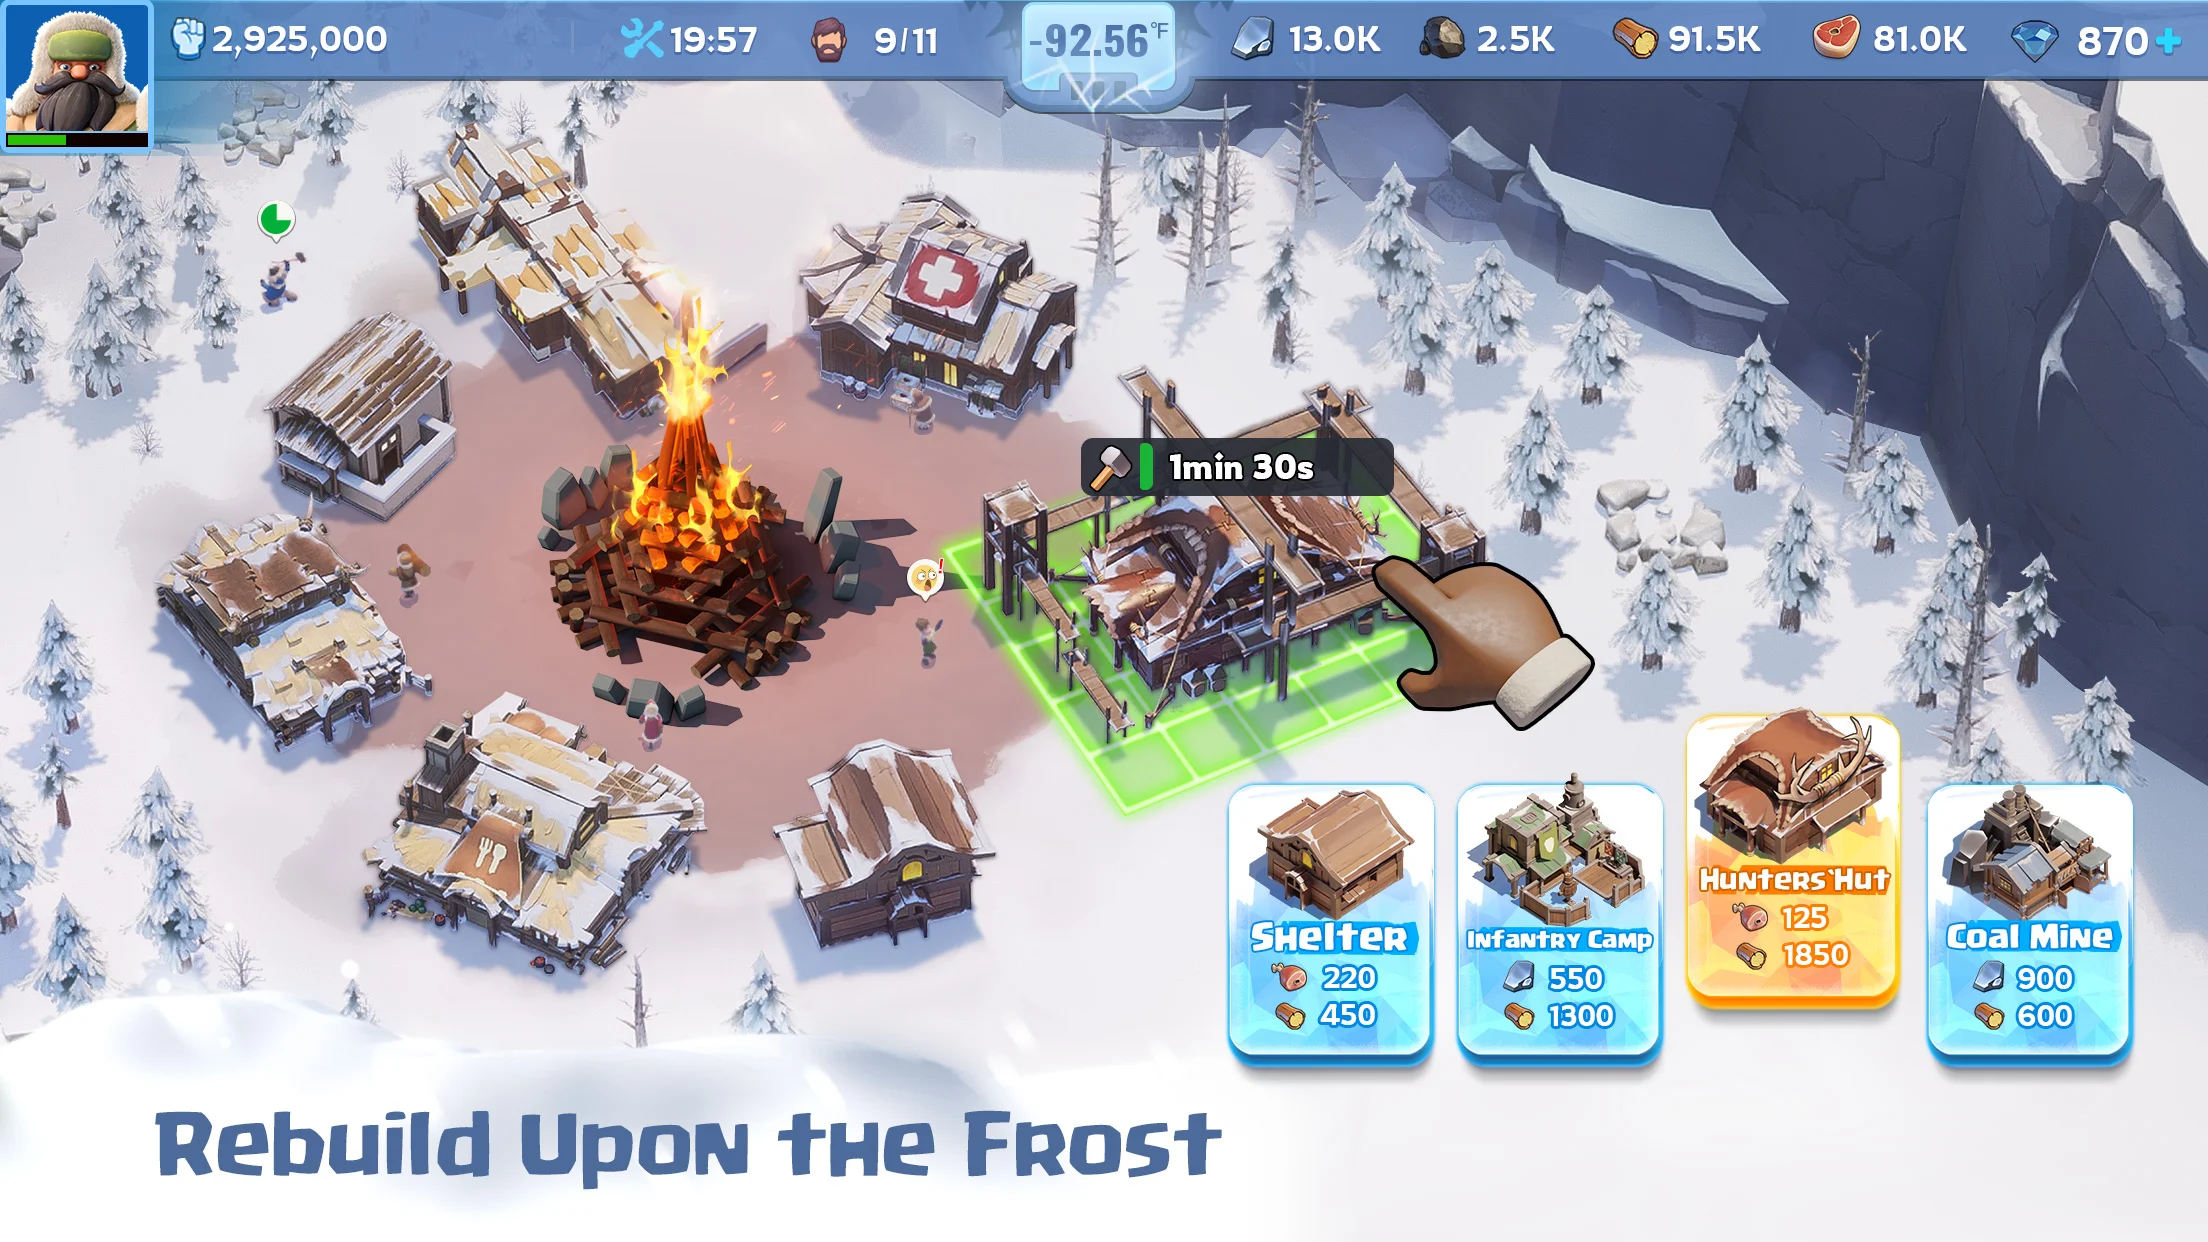 whiteout survival mod apk (unlimited everything latest version)